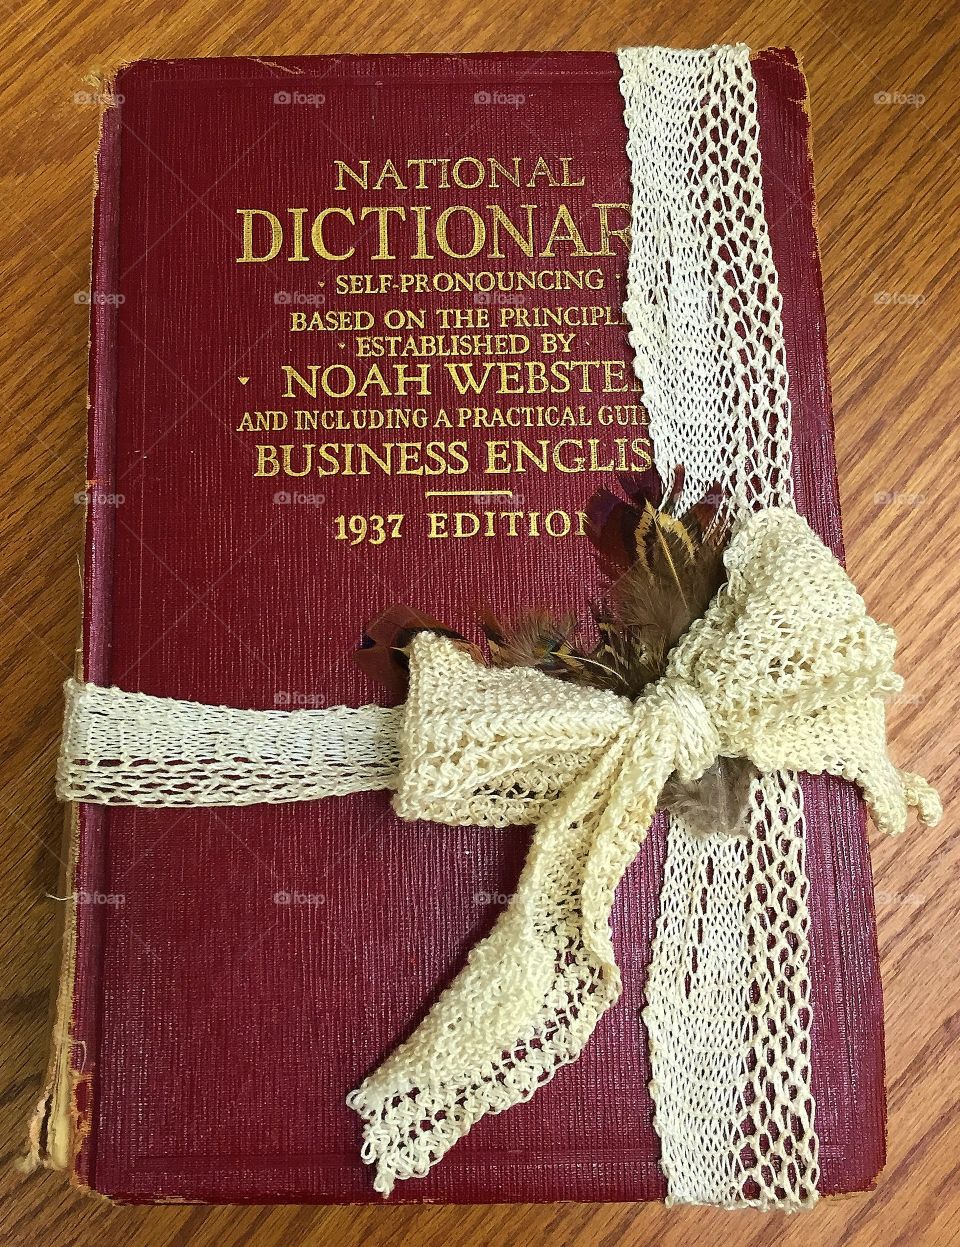 A 1937 edition Webster dictionary